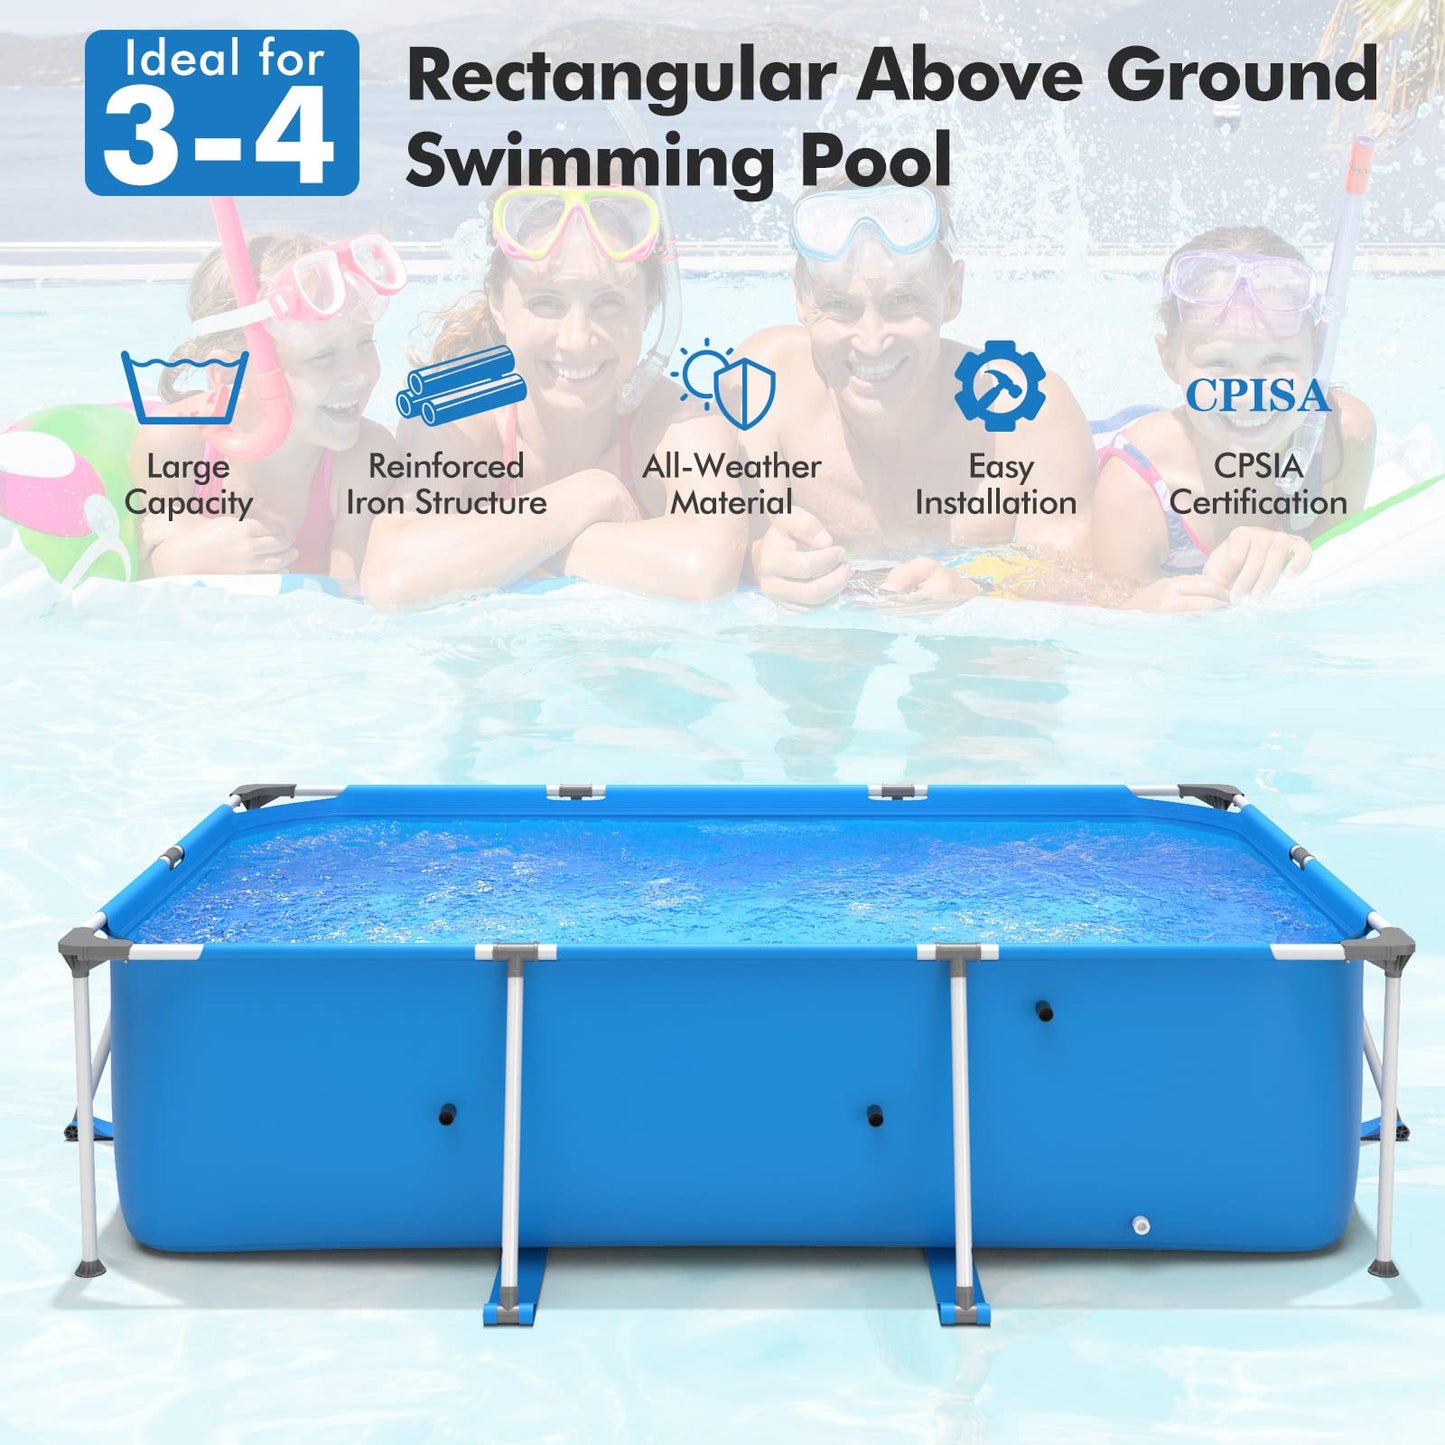 Goplus Frame Swimming Pool, 10ft x 6.7ft x 30in Rectangular Above Ground Pools W/Steel Frame, Pool Cover, Easy Setup & Drainage, Family Pool for Backyard, Garden,Patio, Balcony (Blue) Blue